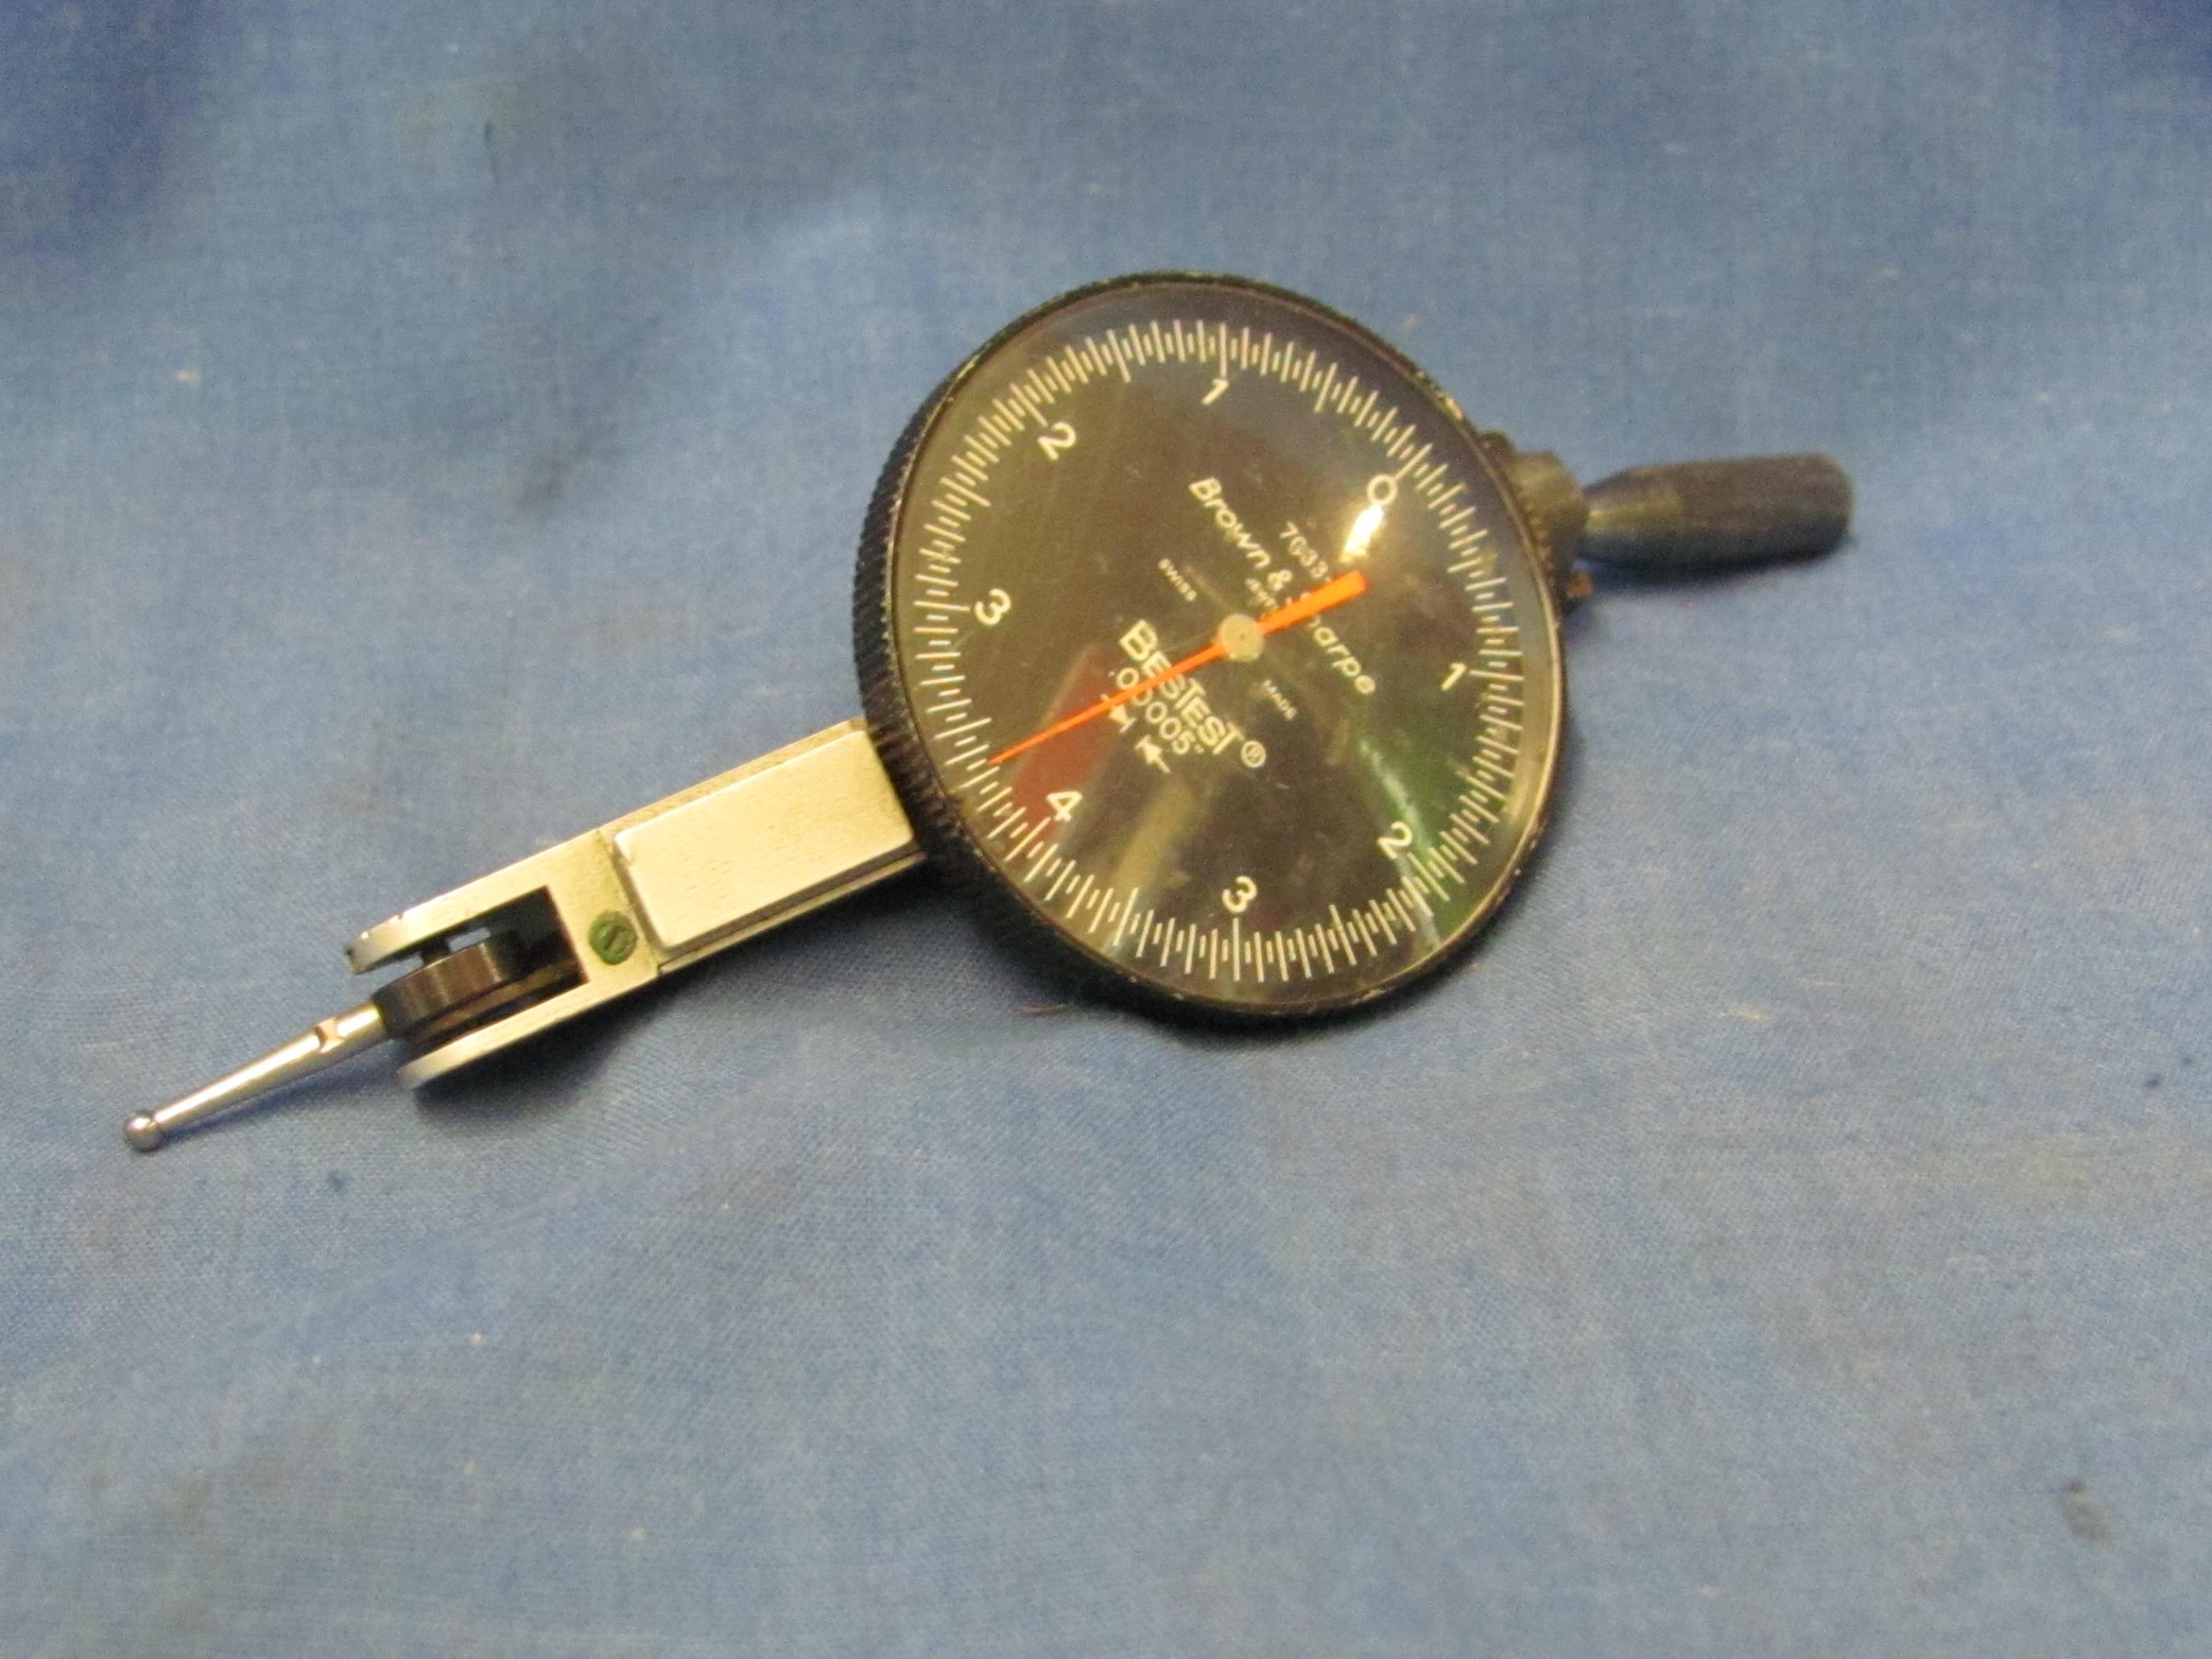 Brown & Sharpe BesTest Dial Indicator Gage 7033-5 – Not Tested – As Shown